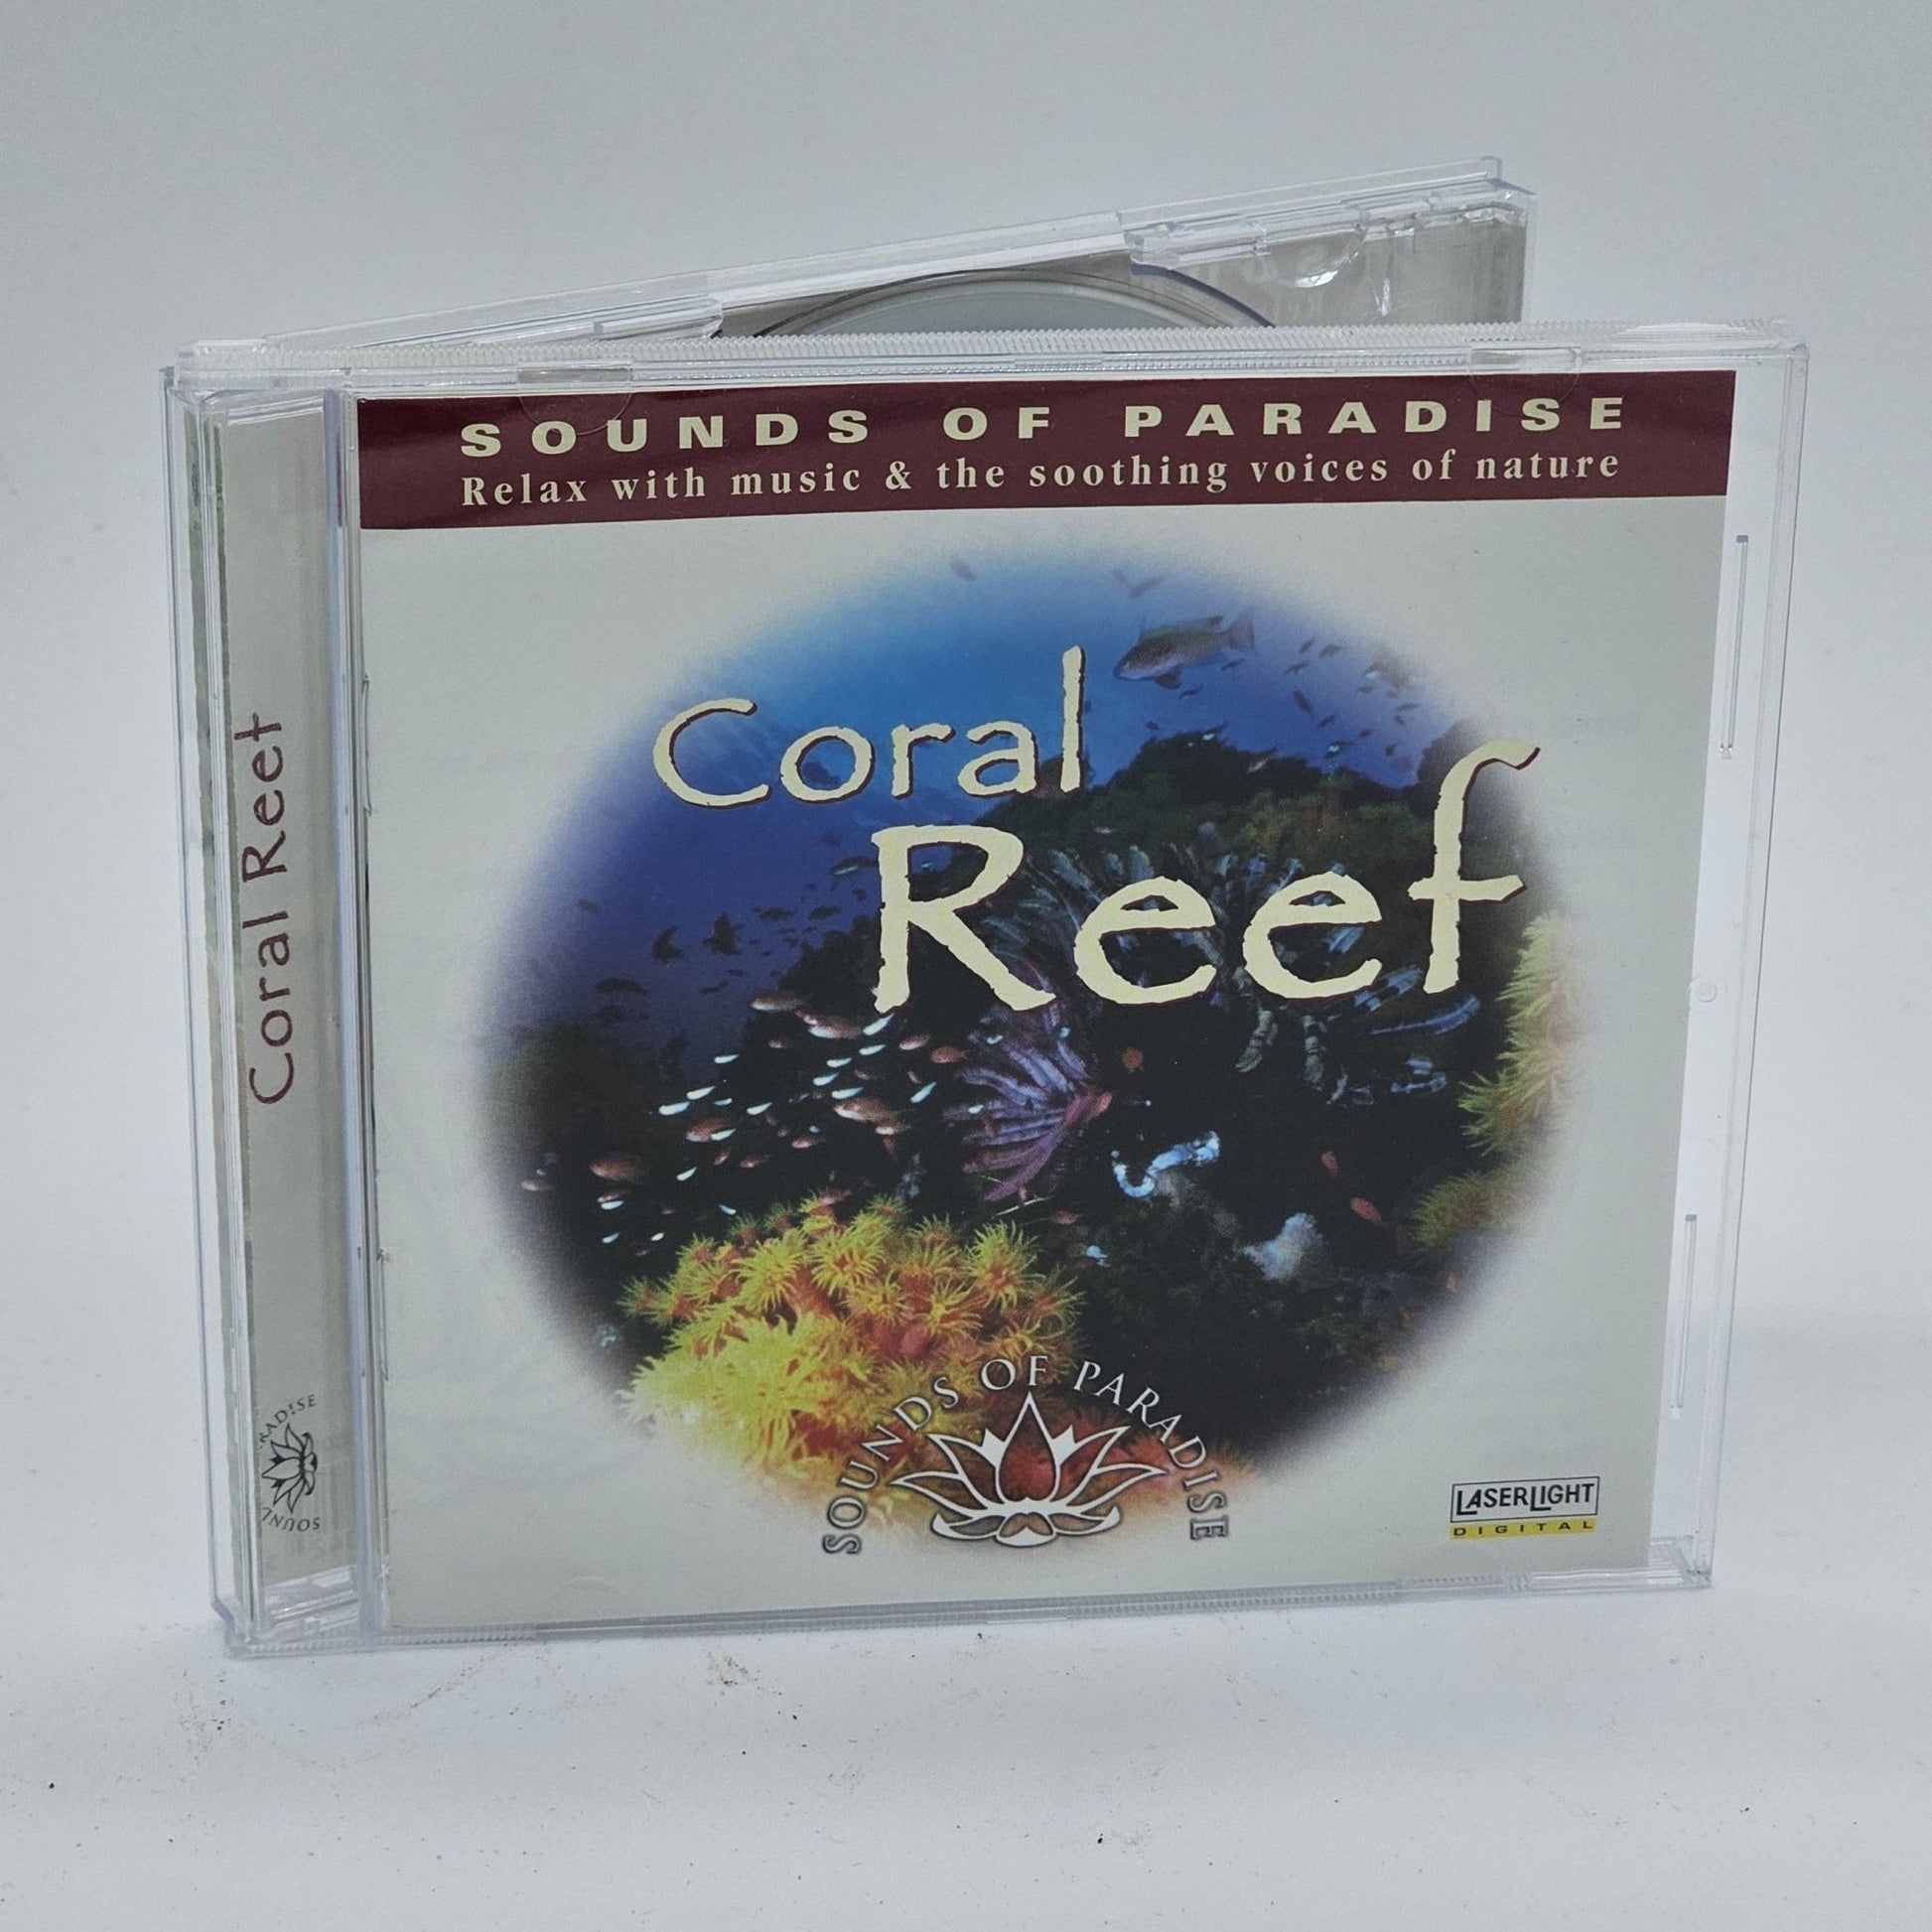 Laserlight Digital - Sounds Of Paradise | Coral Reef | CD - Compact Disc - Steady Bunny Shop